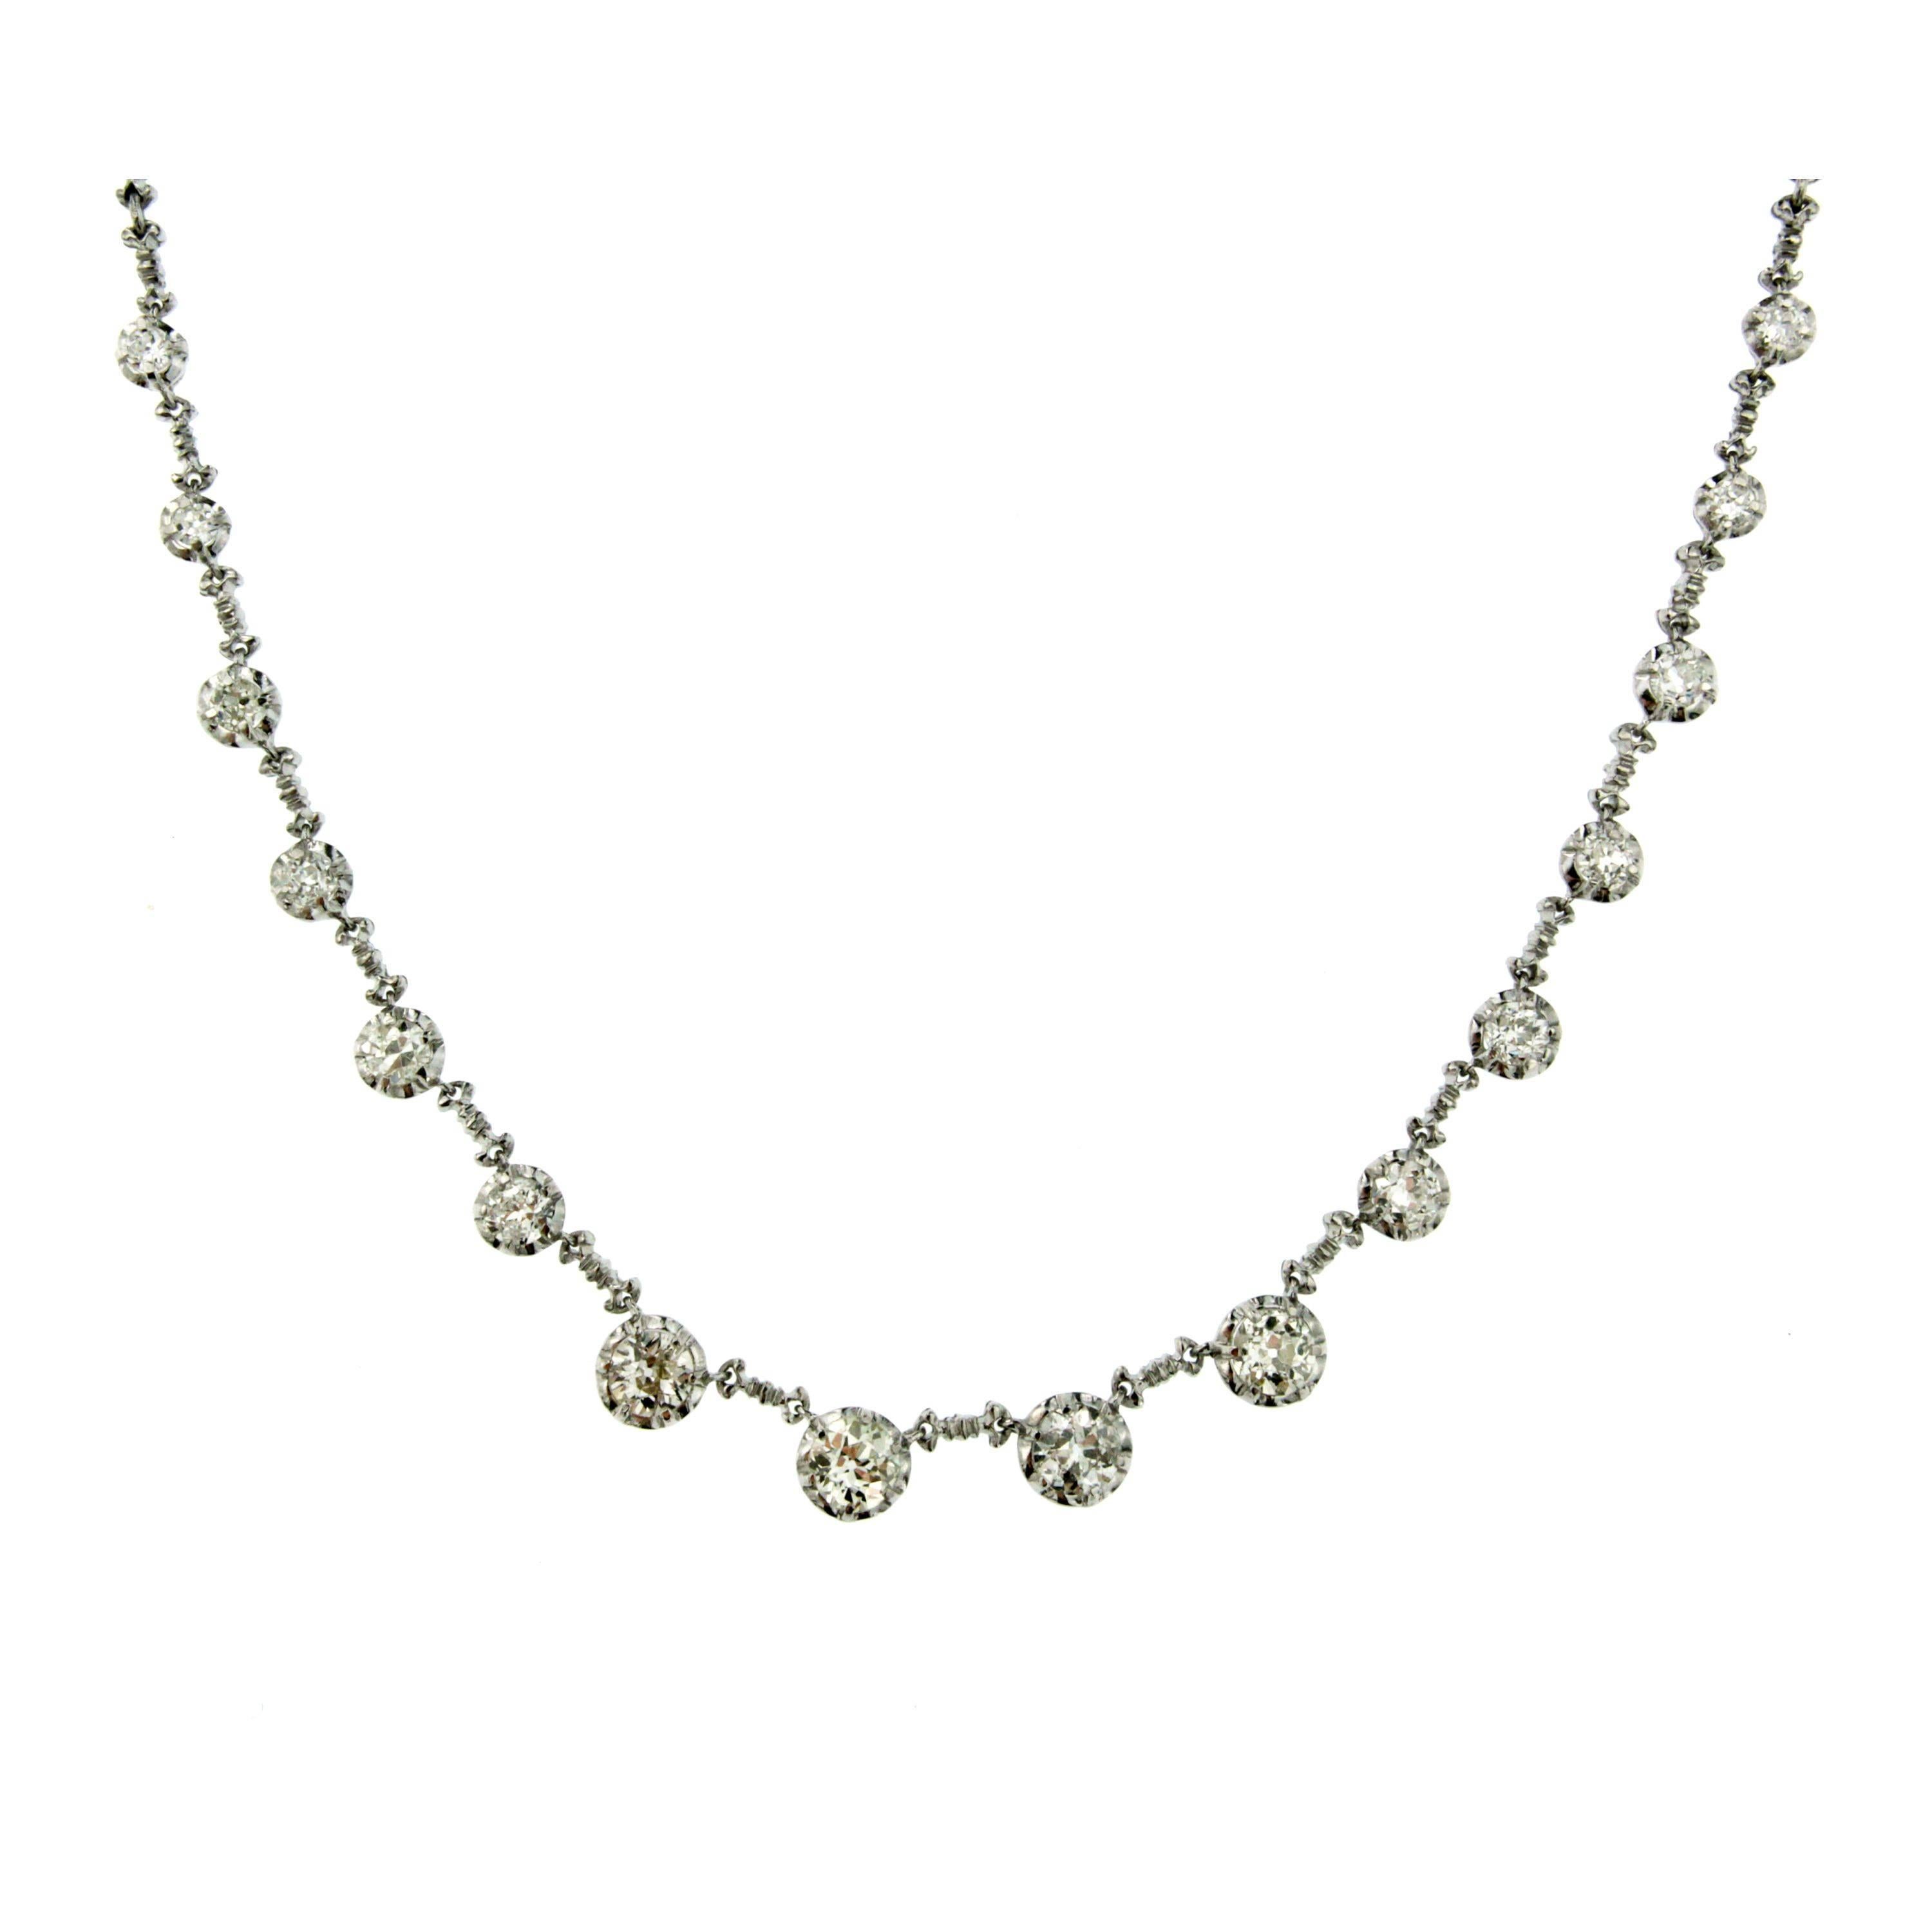 An exquisite Gold Diamond necklace set with 8.00 carats of Sparkling old mine cut Diamonds graded H/I Color VS1 clarity.
Exclusively hand crafted by great Italian masters craftsman from precious 18k white gold. Circa 1980

CONDITION: Pre-owned -